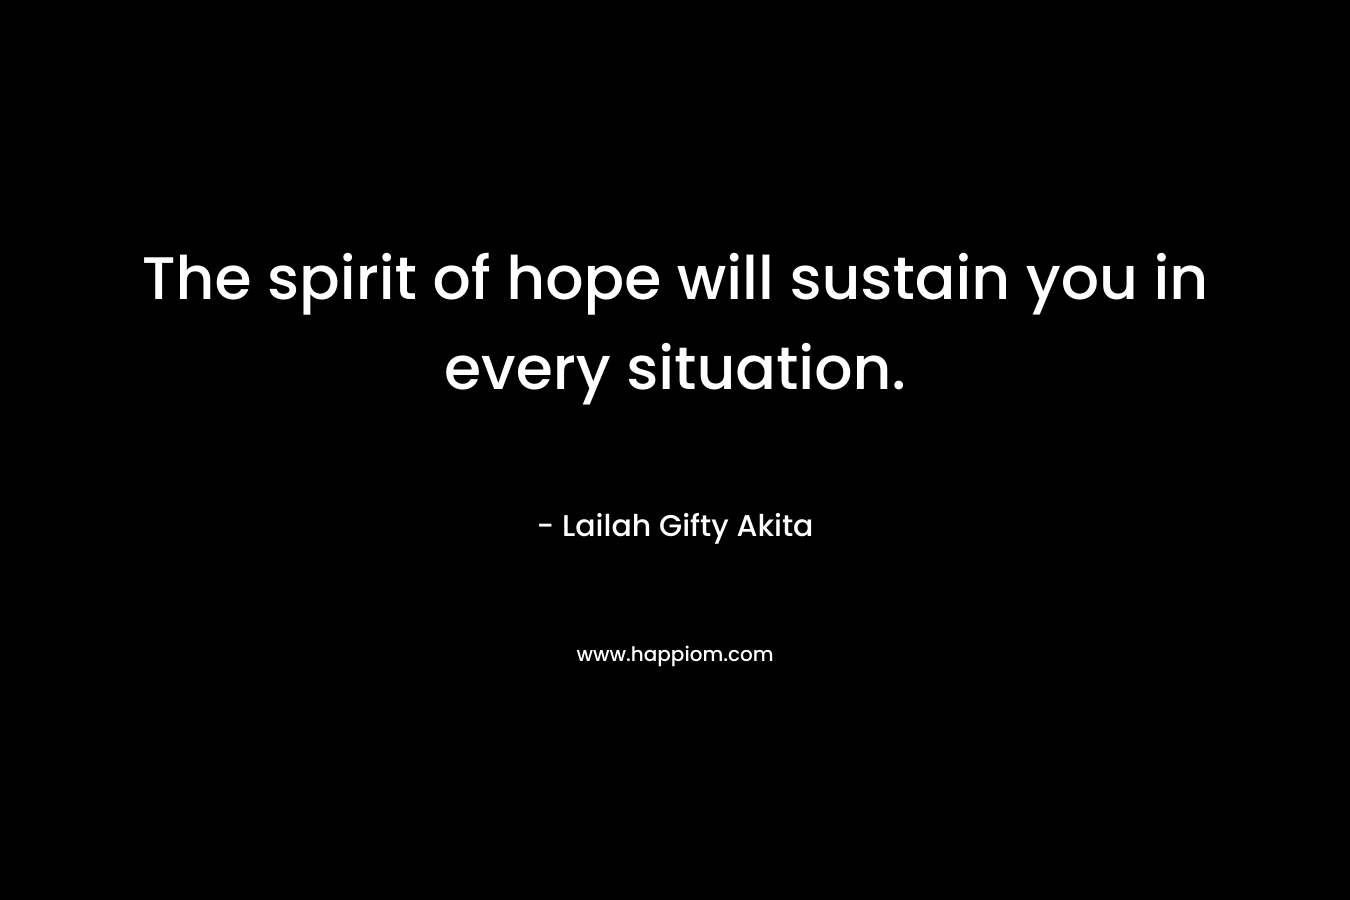 The spirit of hope will sustain you in every situation.